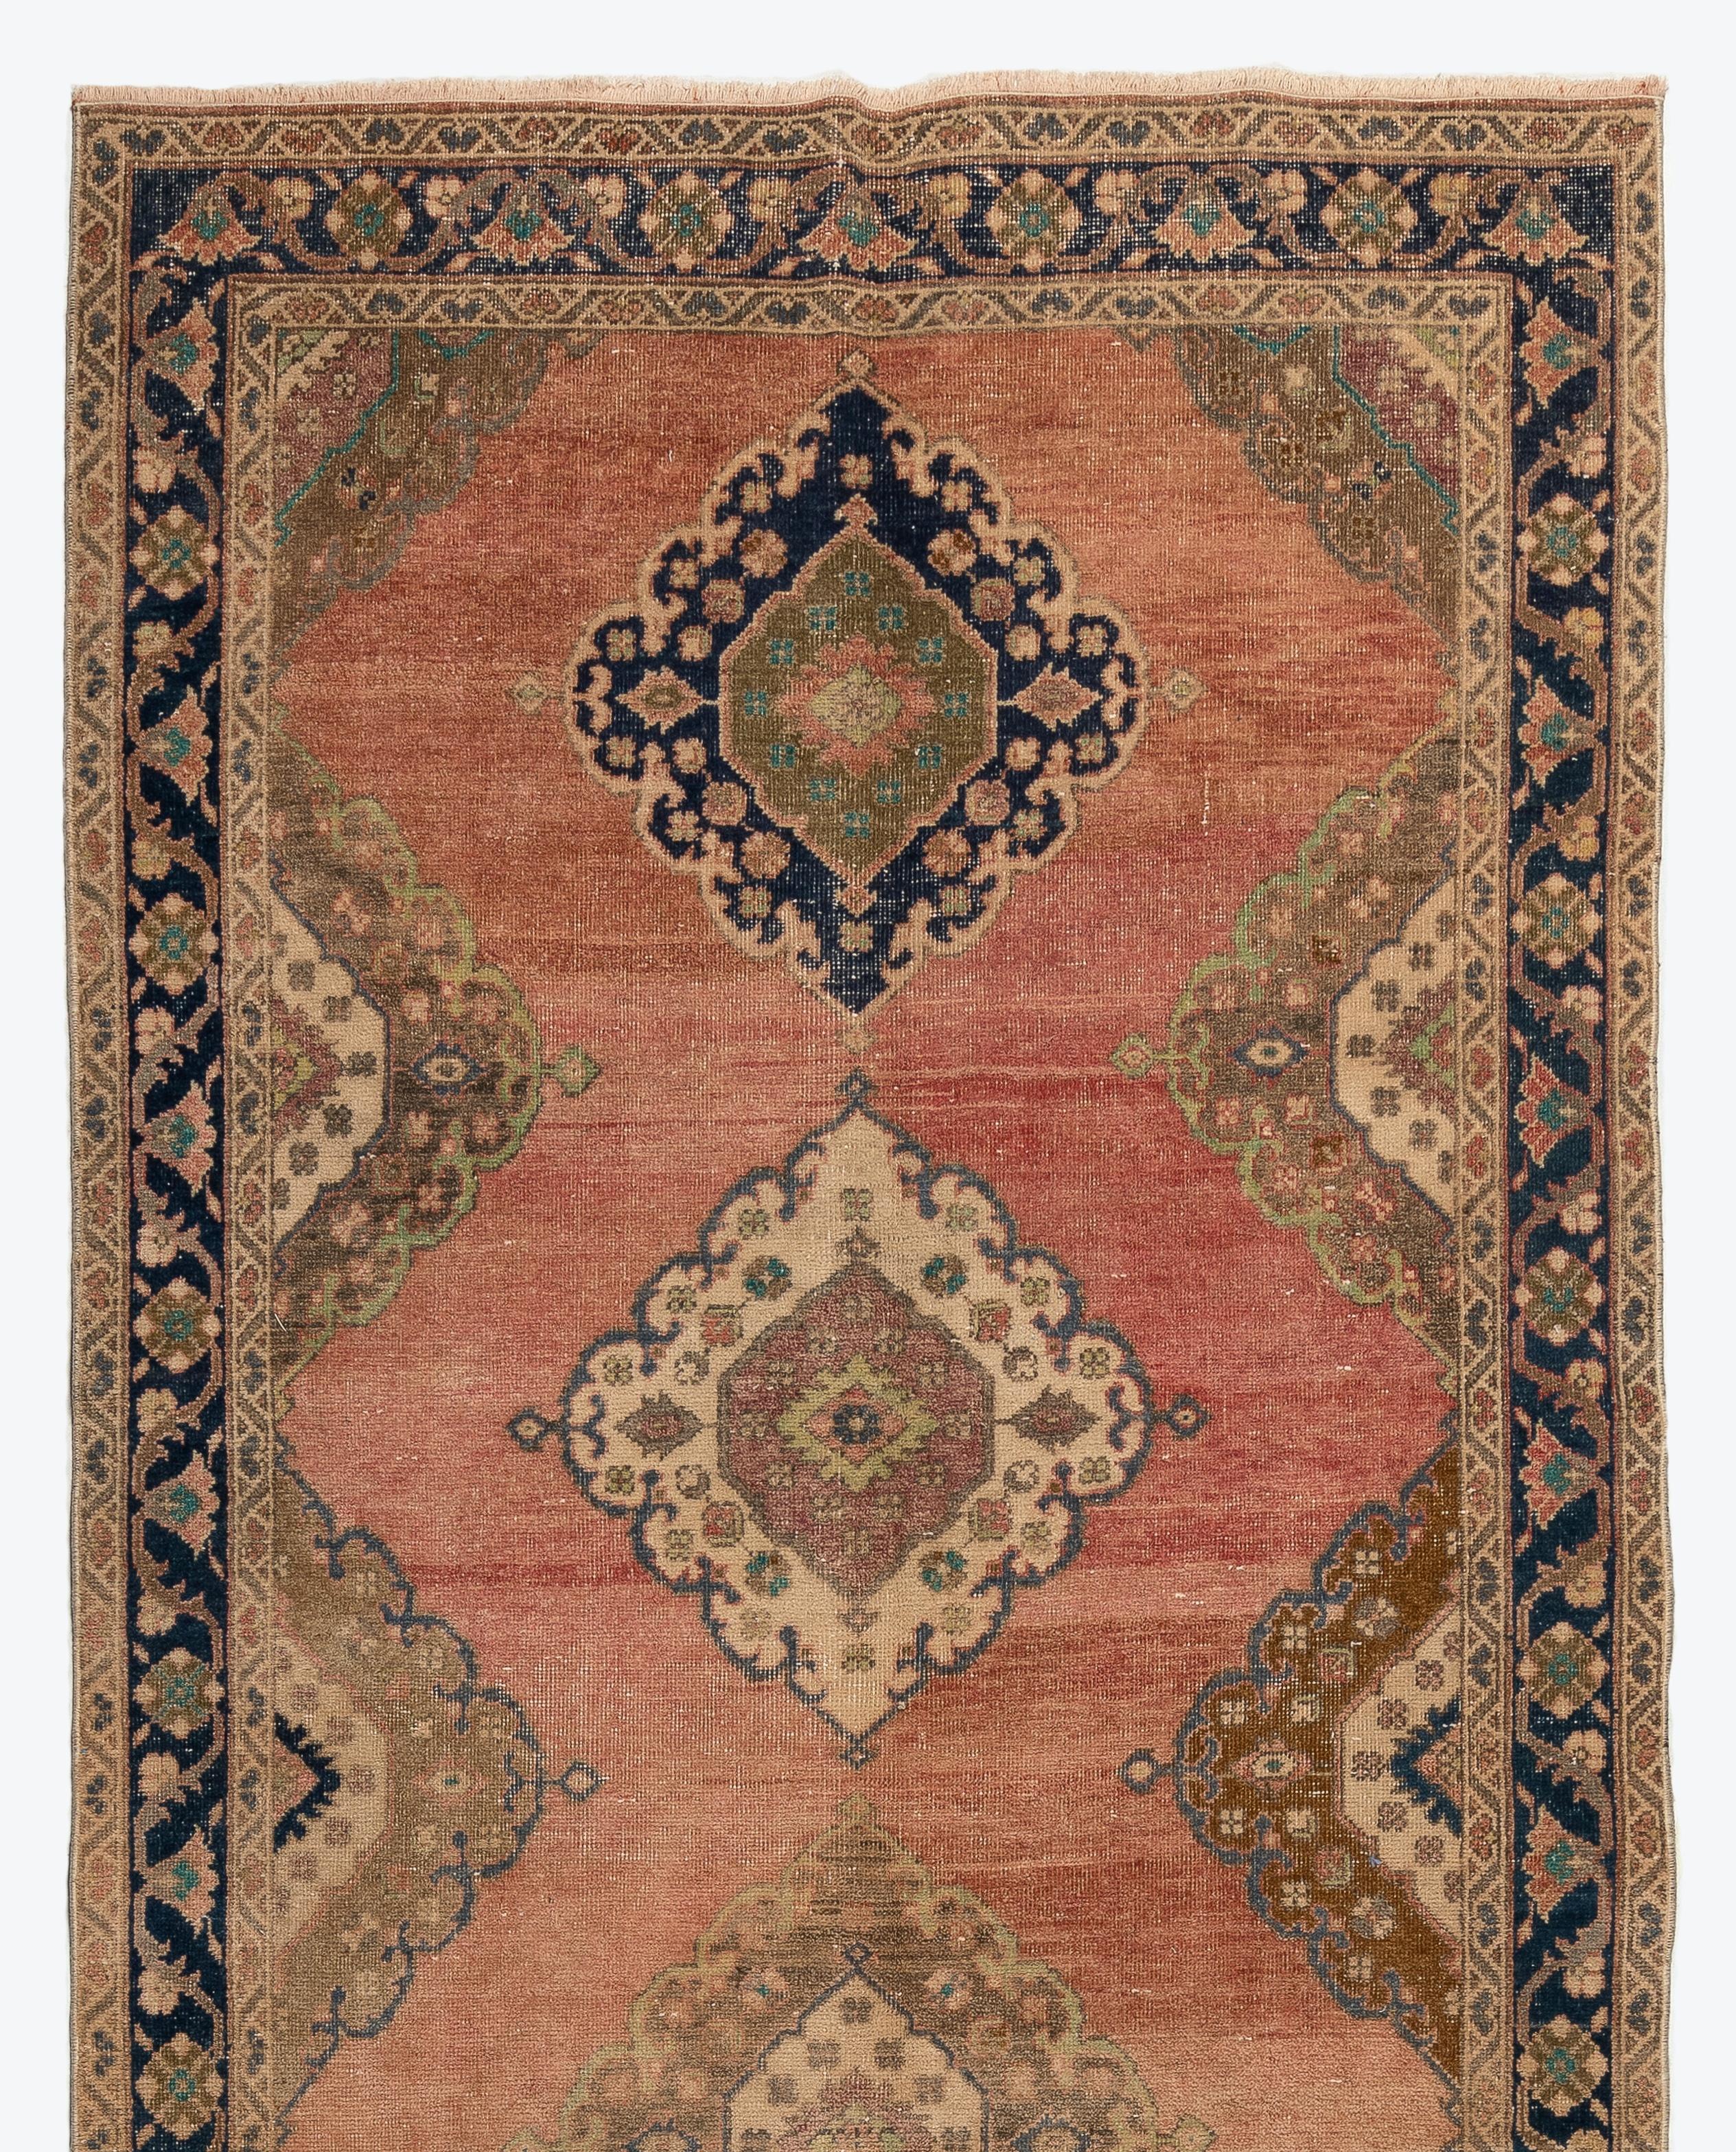 A vintage runner rug from Turkey. It is made of medium wool pile on wool foundation and features multiple medallion design in soft colors. Measures: 4.8 x 12 ft
It has been washed professionally, the rug is sturdy and can be used in both